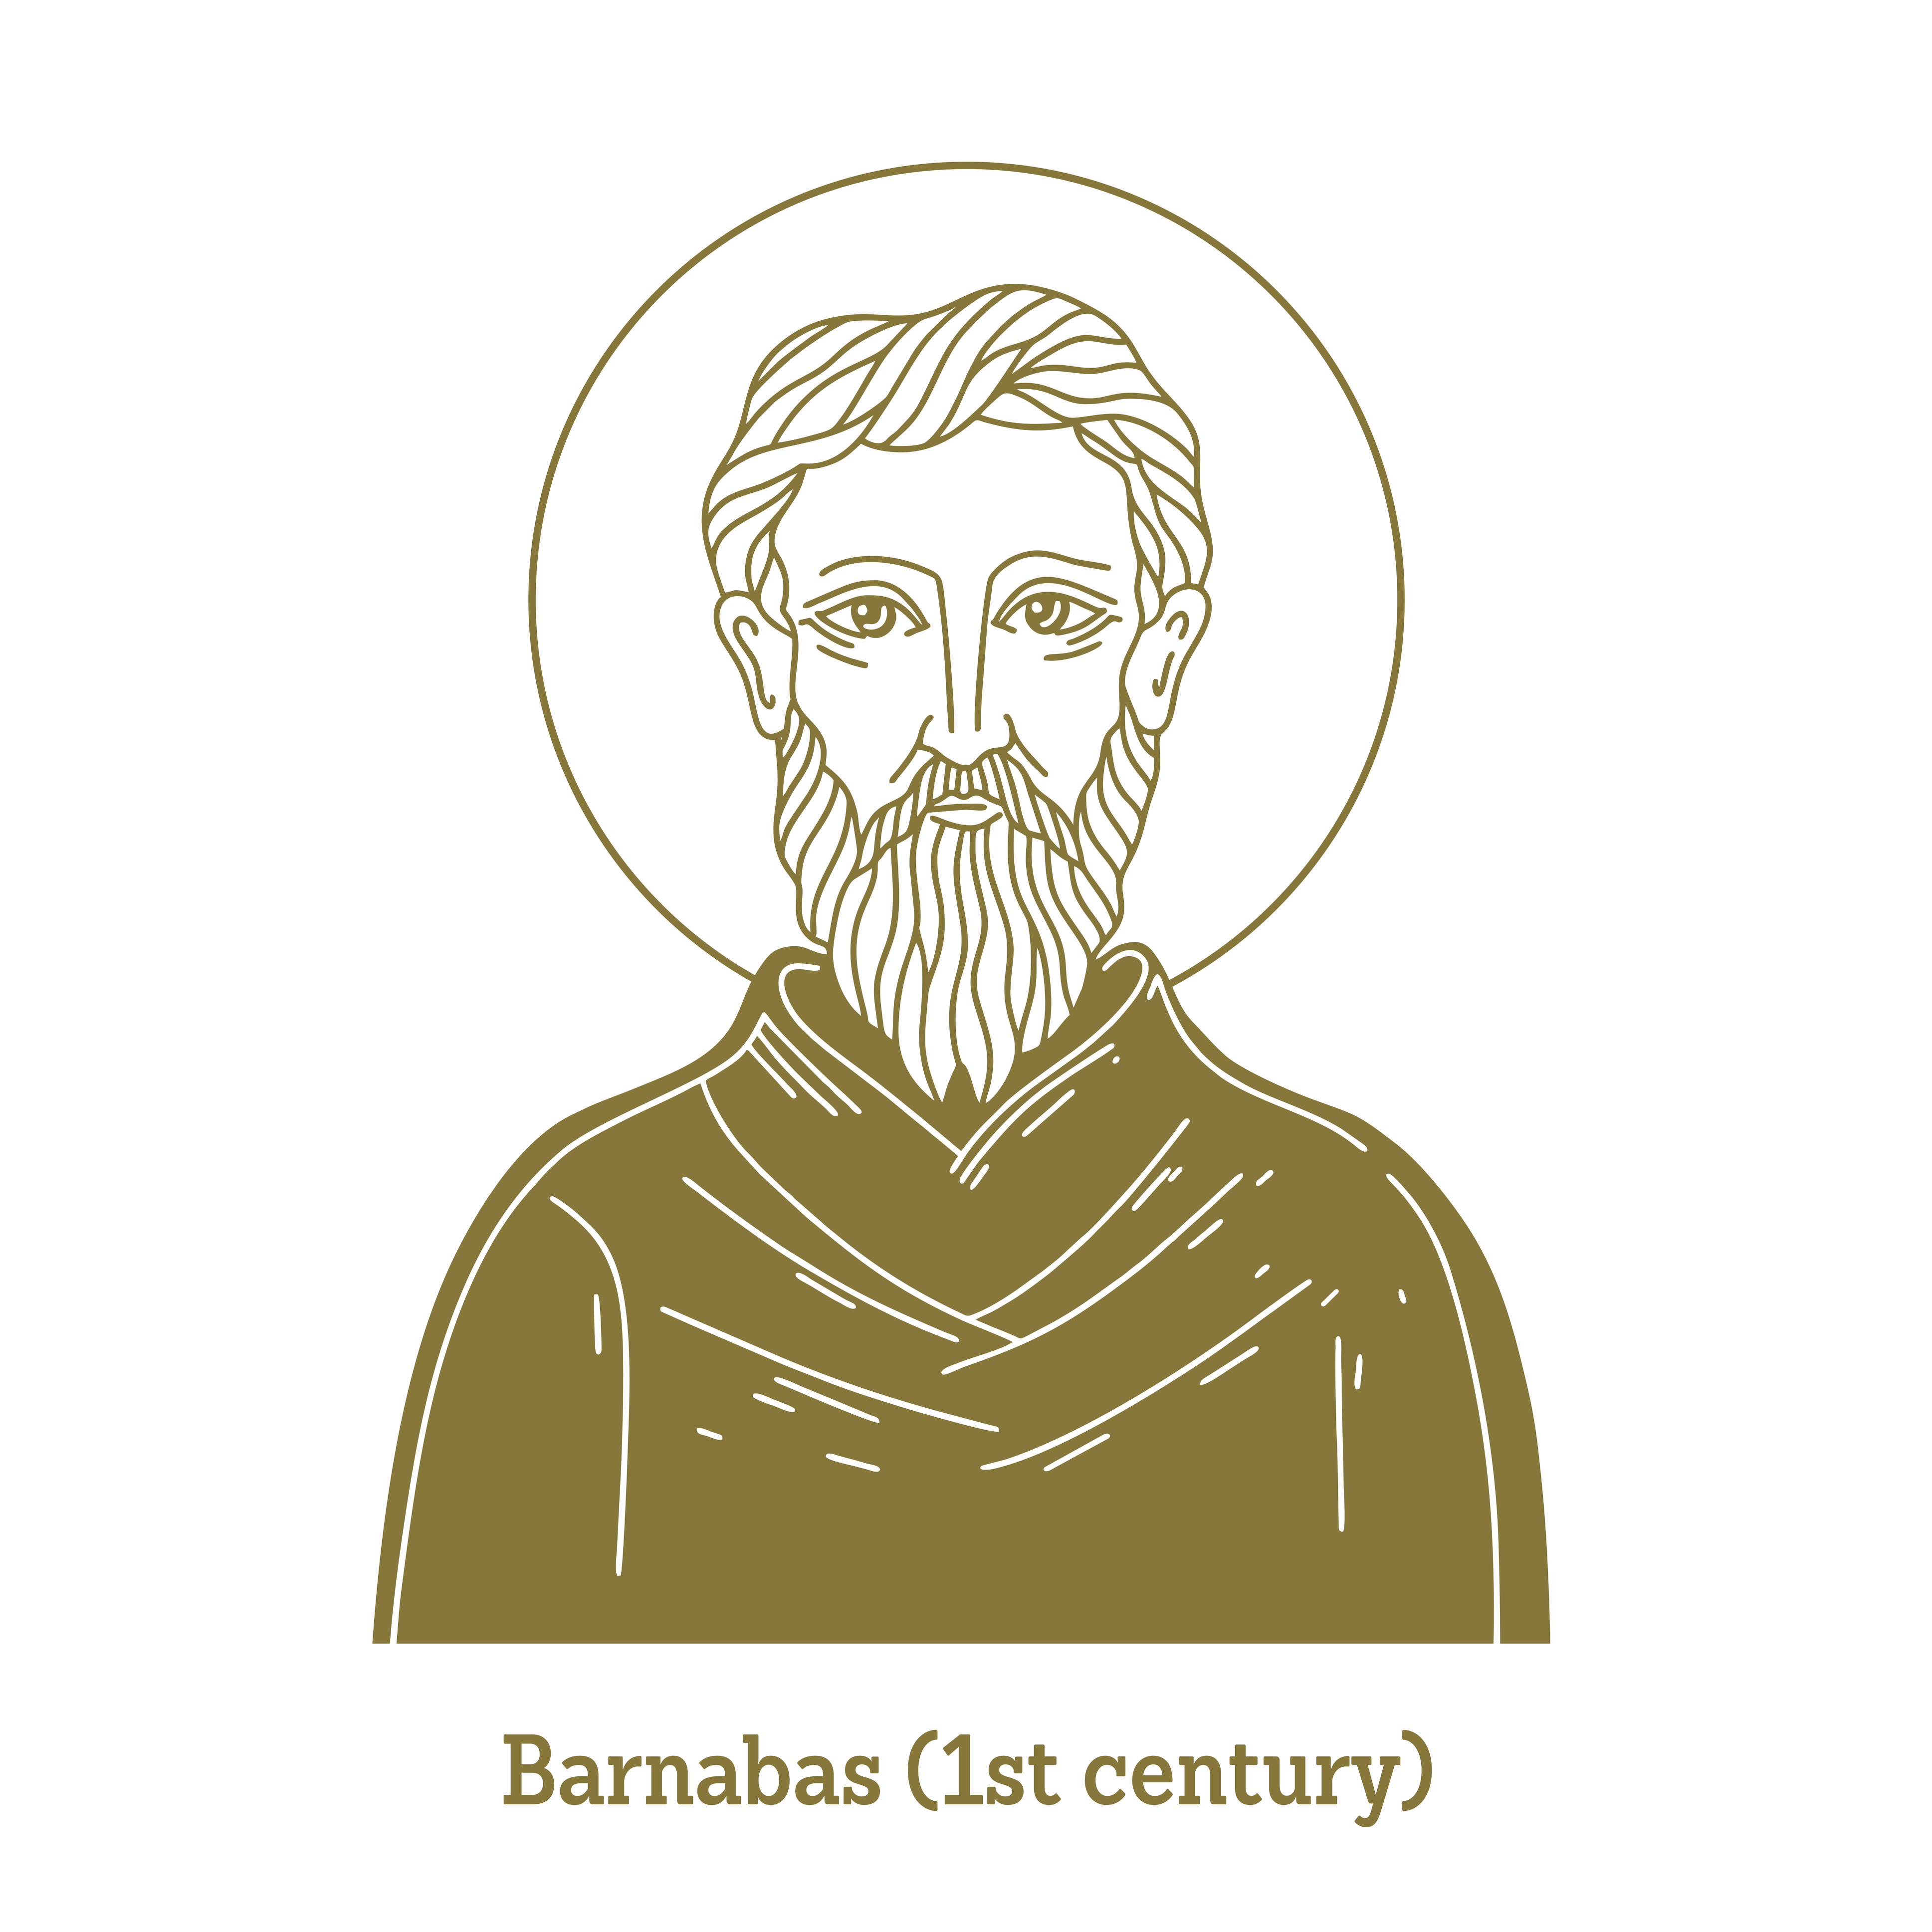 https://lastmessageofmercy.com/images/books/The%20Lord's%20Day/Barnabas.jpeg